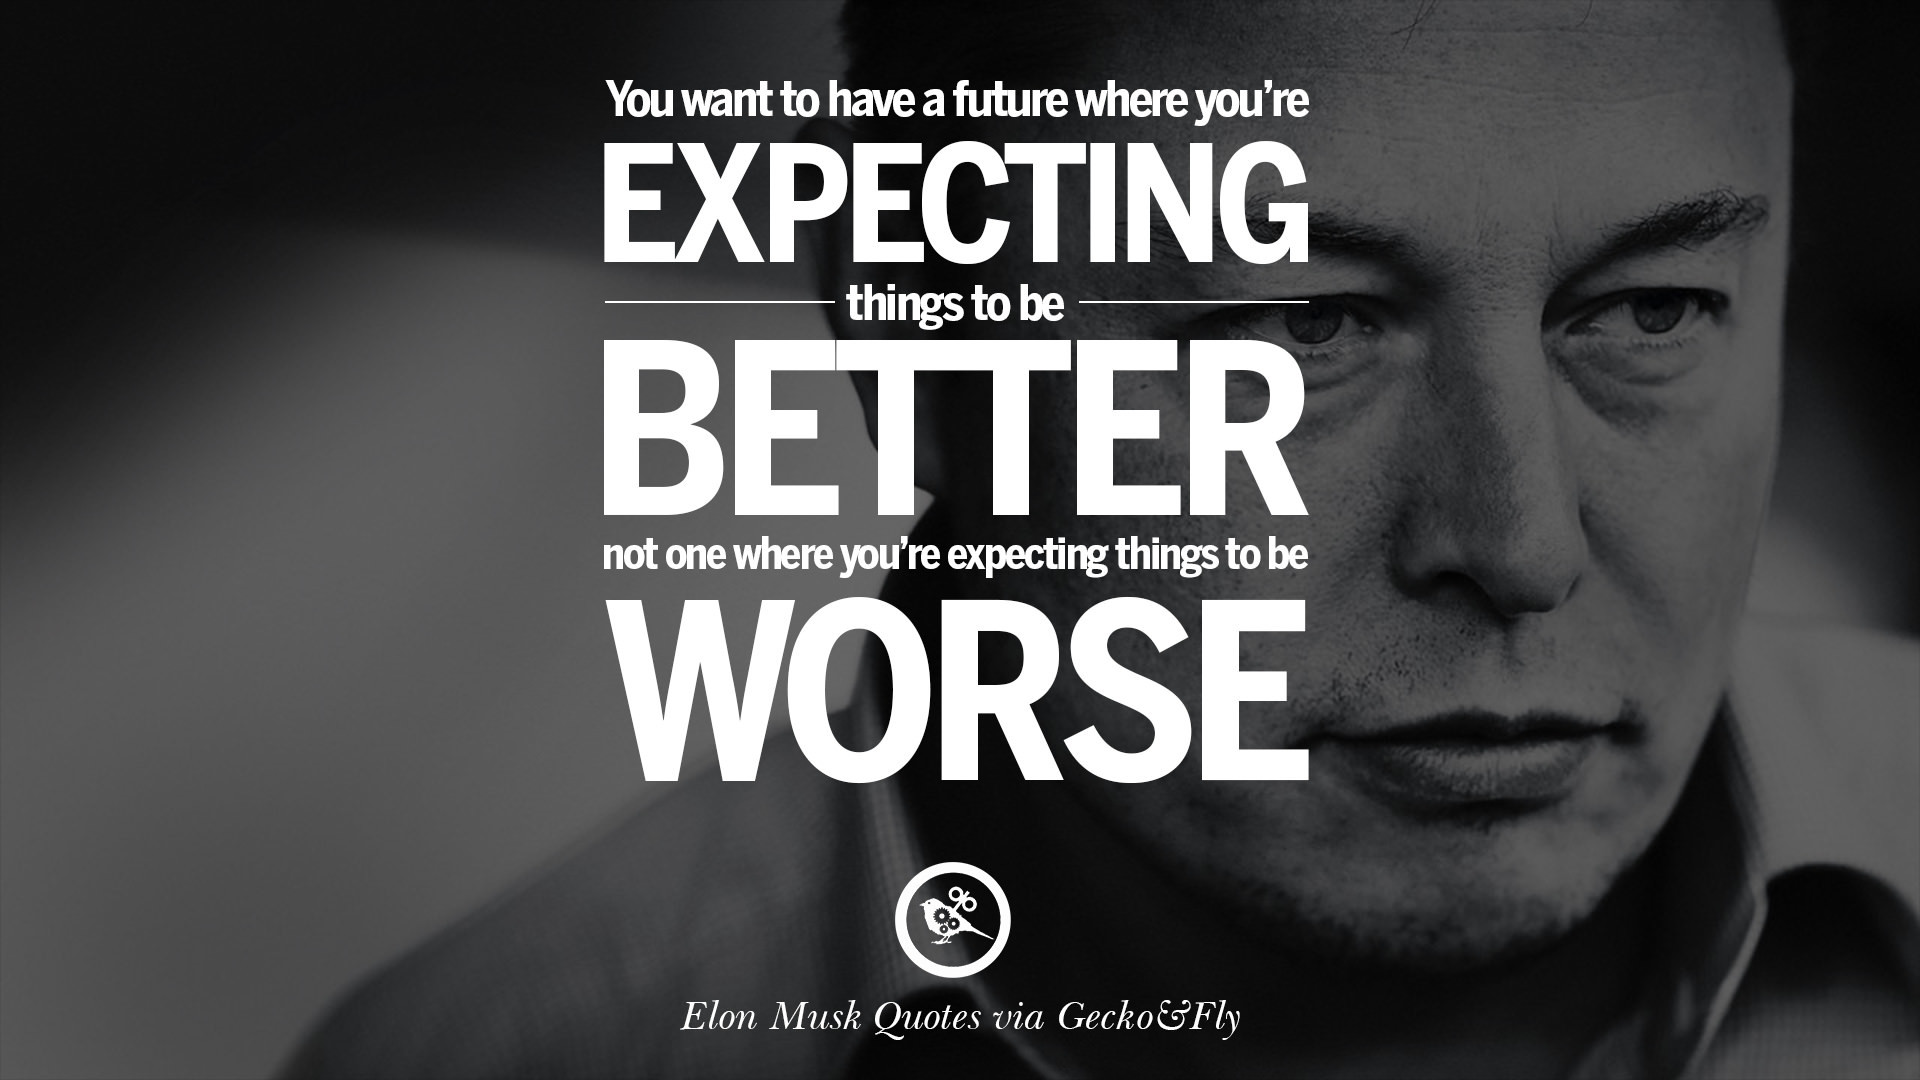 Expecting things. Elon Musk. Elon Musk quotes. Elon Musk quotation. Elon Musk quotes Wallpaper.